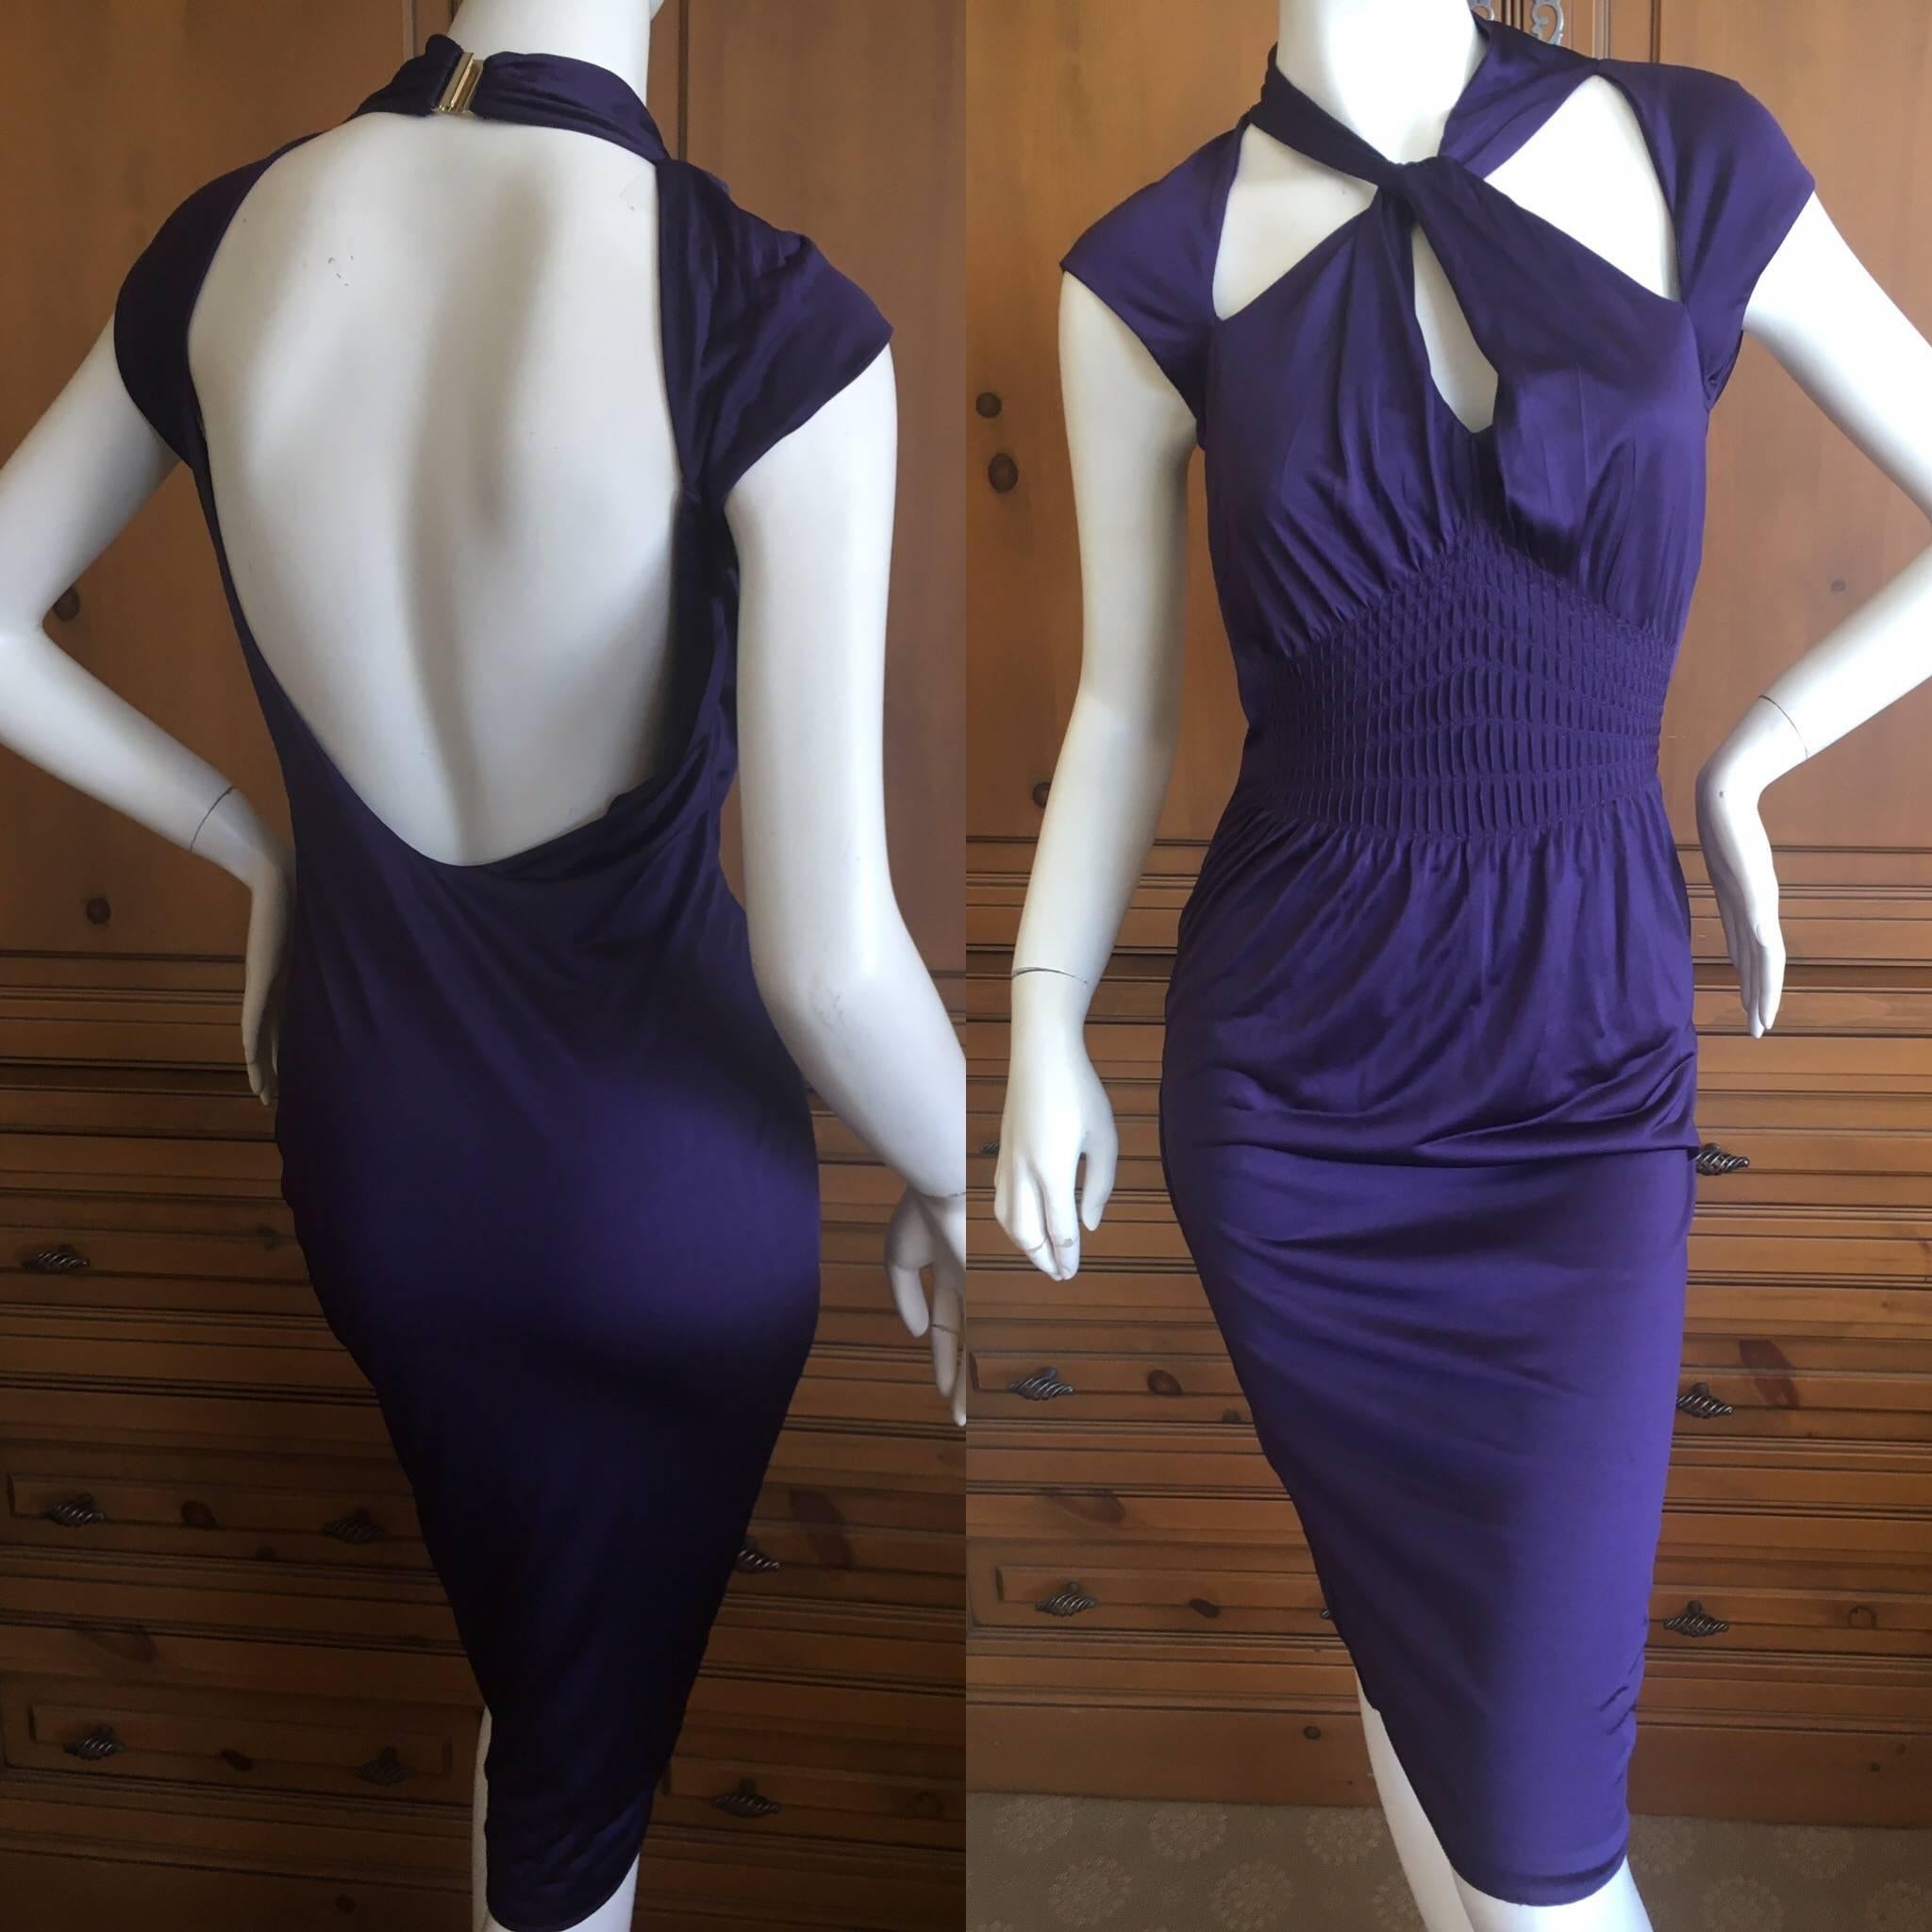 Gucci by Tom Ford Purple Backless Knot Dress.
This is so much prettier than the photos show, gathered in the front, backless in back.
Size S
Bust 36